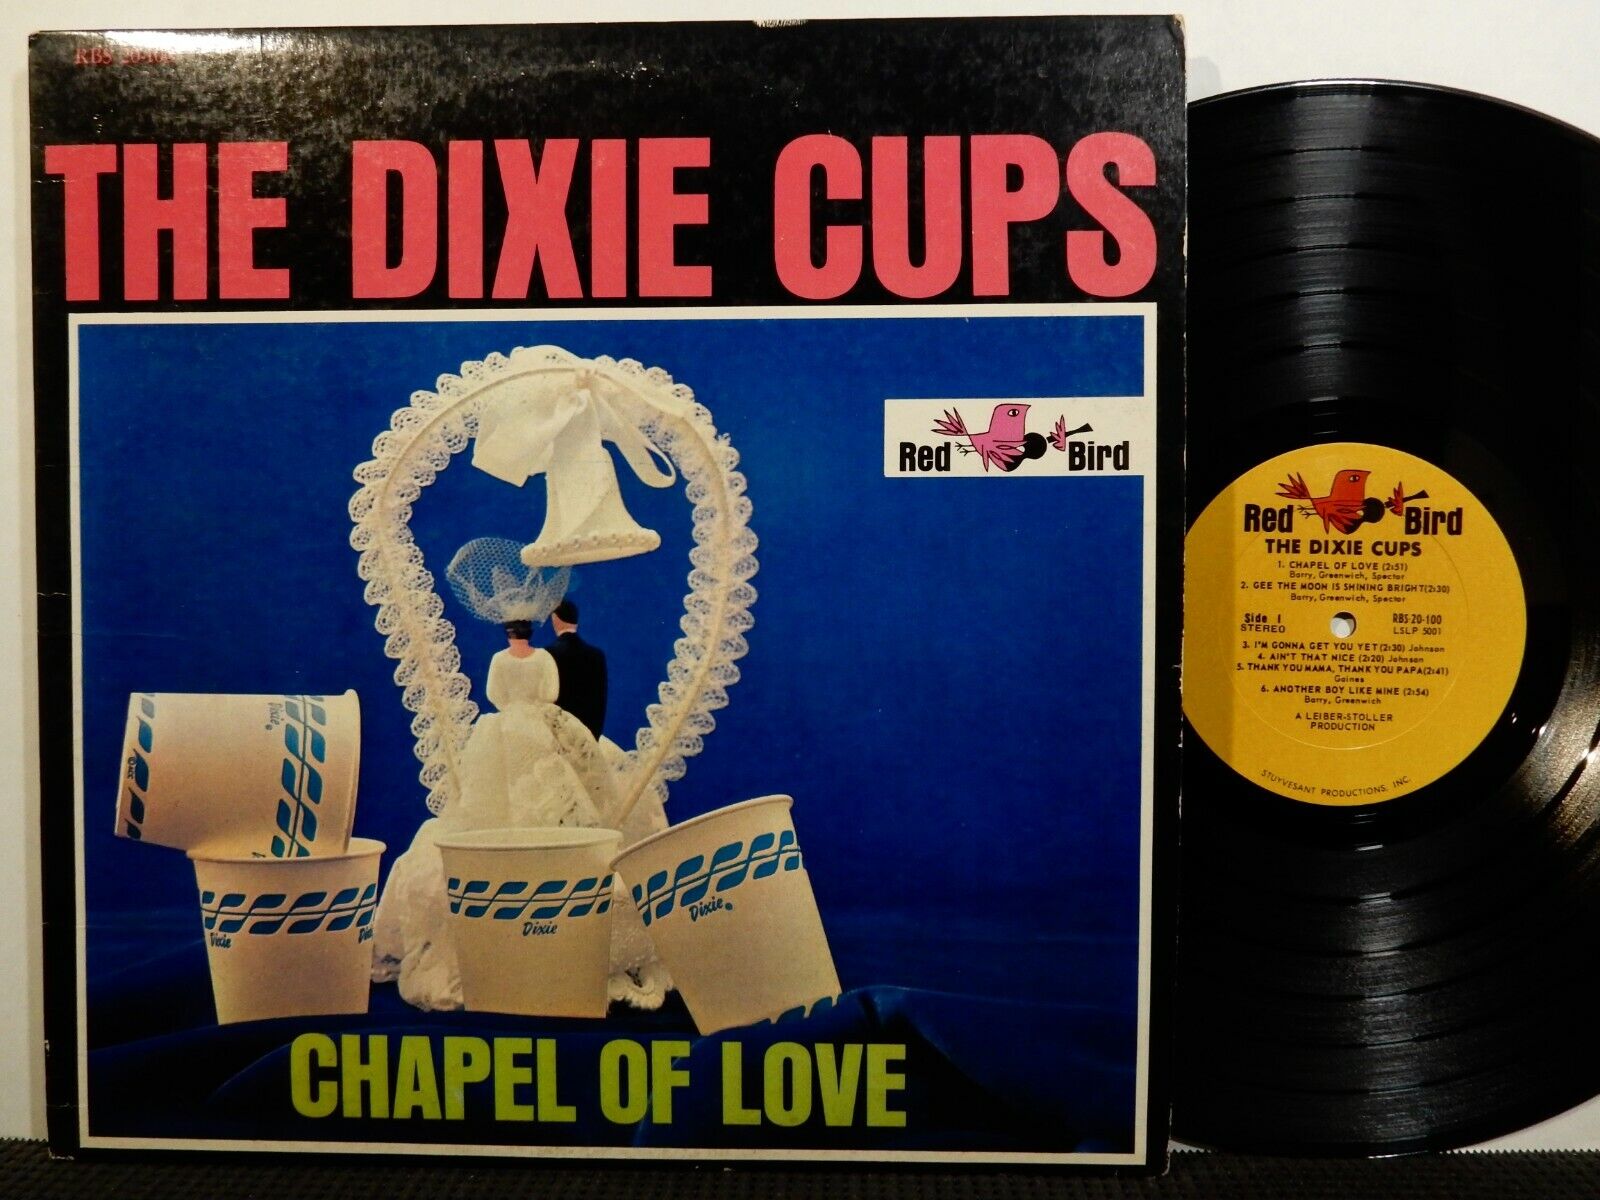 THE DIXIE CUPS LP RED BIRD RBS-20-100 STEREO 1964 Soul R&B Chapel Of Love